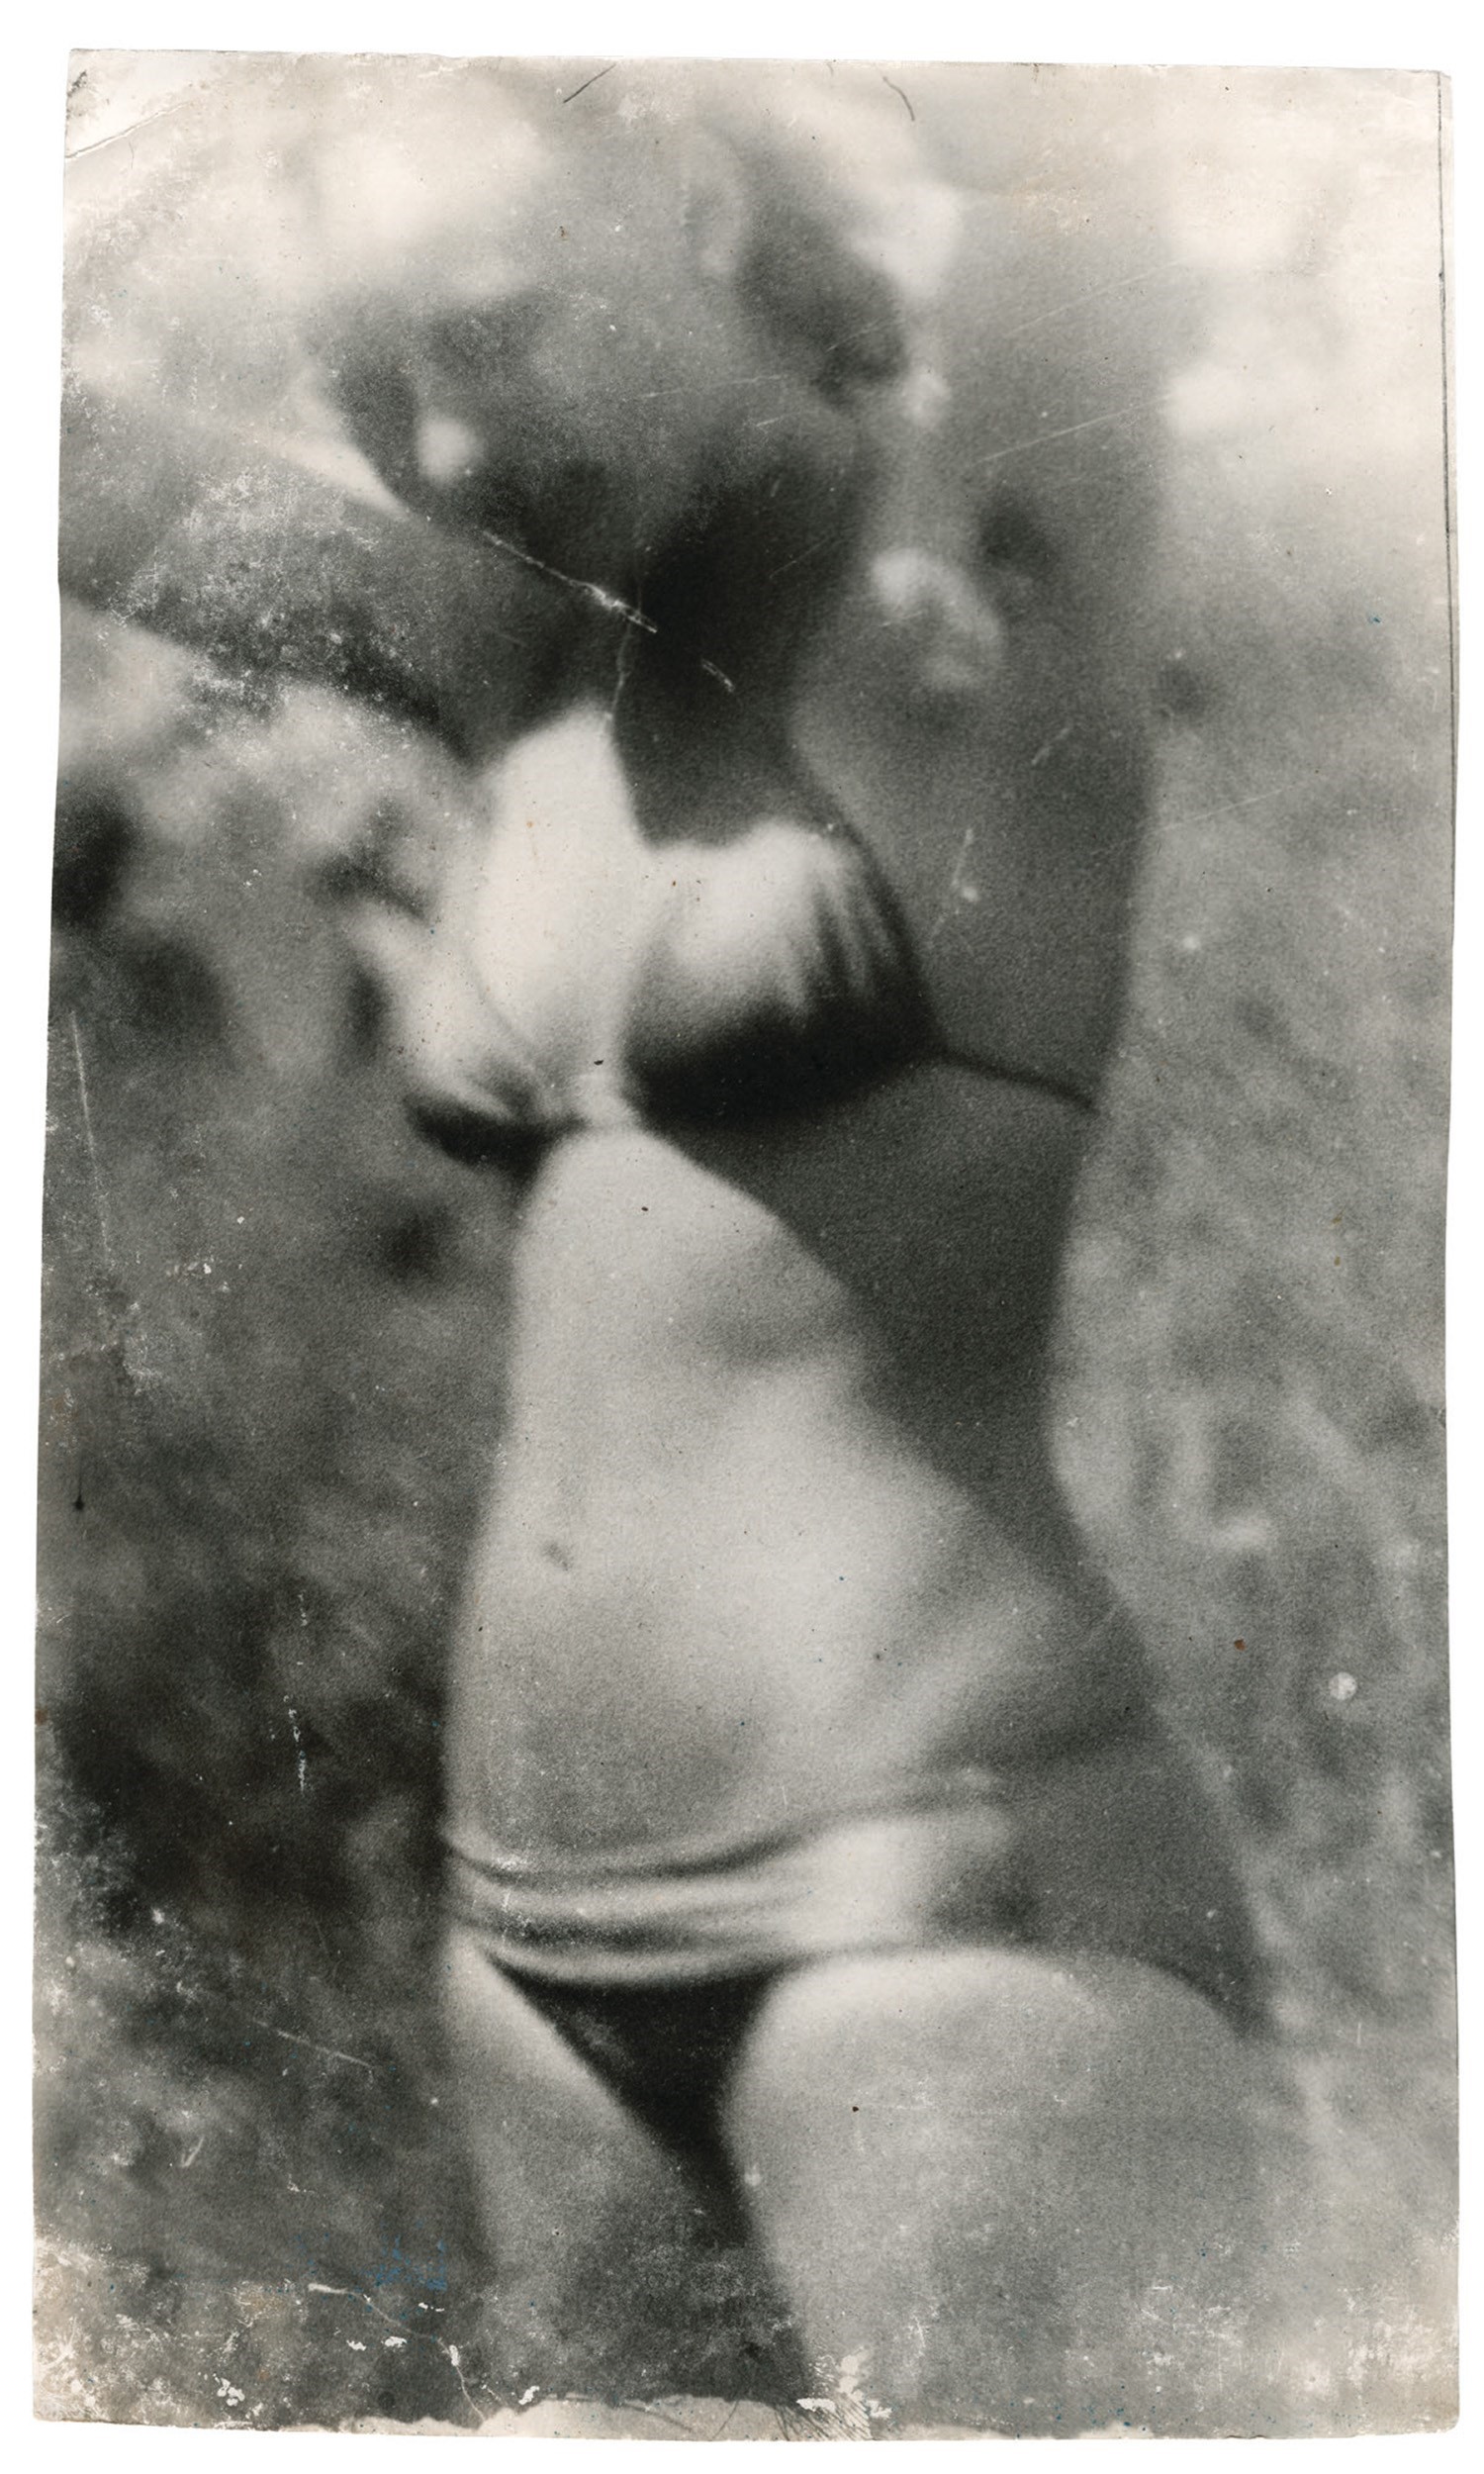 Miroslav Tichýs Mysterious Images of Unsuspecting Women AnotherMan image image